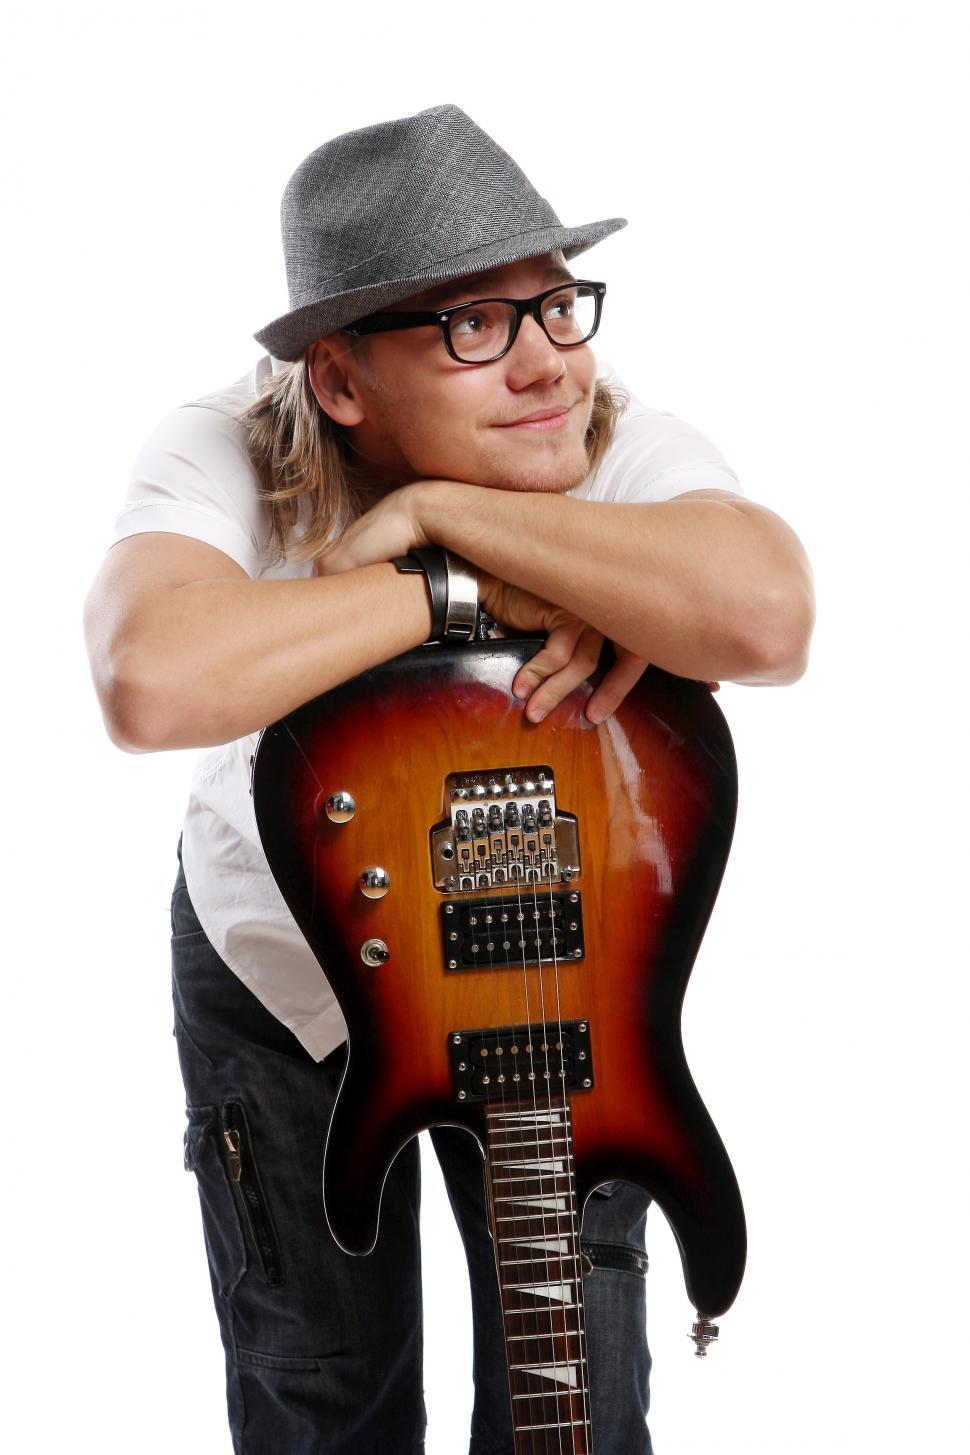 Free Image of a young musician leaning on an electric guitar 